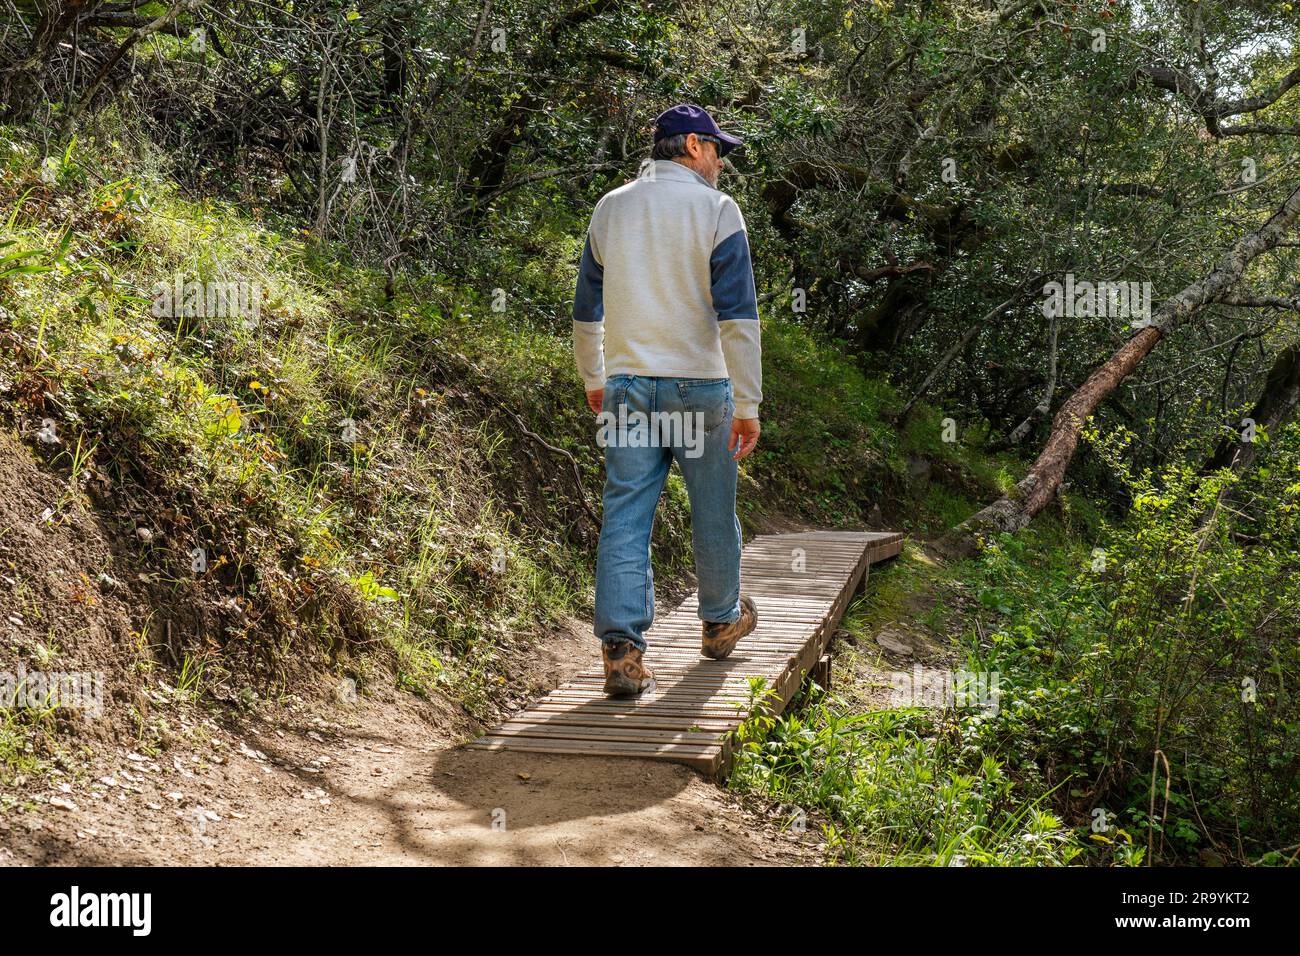 Man, visitor, Hiker walking on a plank walkway through a damaged section of a trail on a hill with oak trees and grass, Waterdog Lake Park, Belmont, C Stock Photo